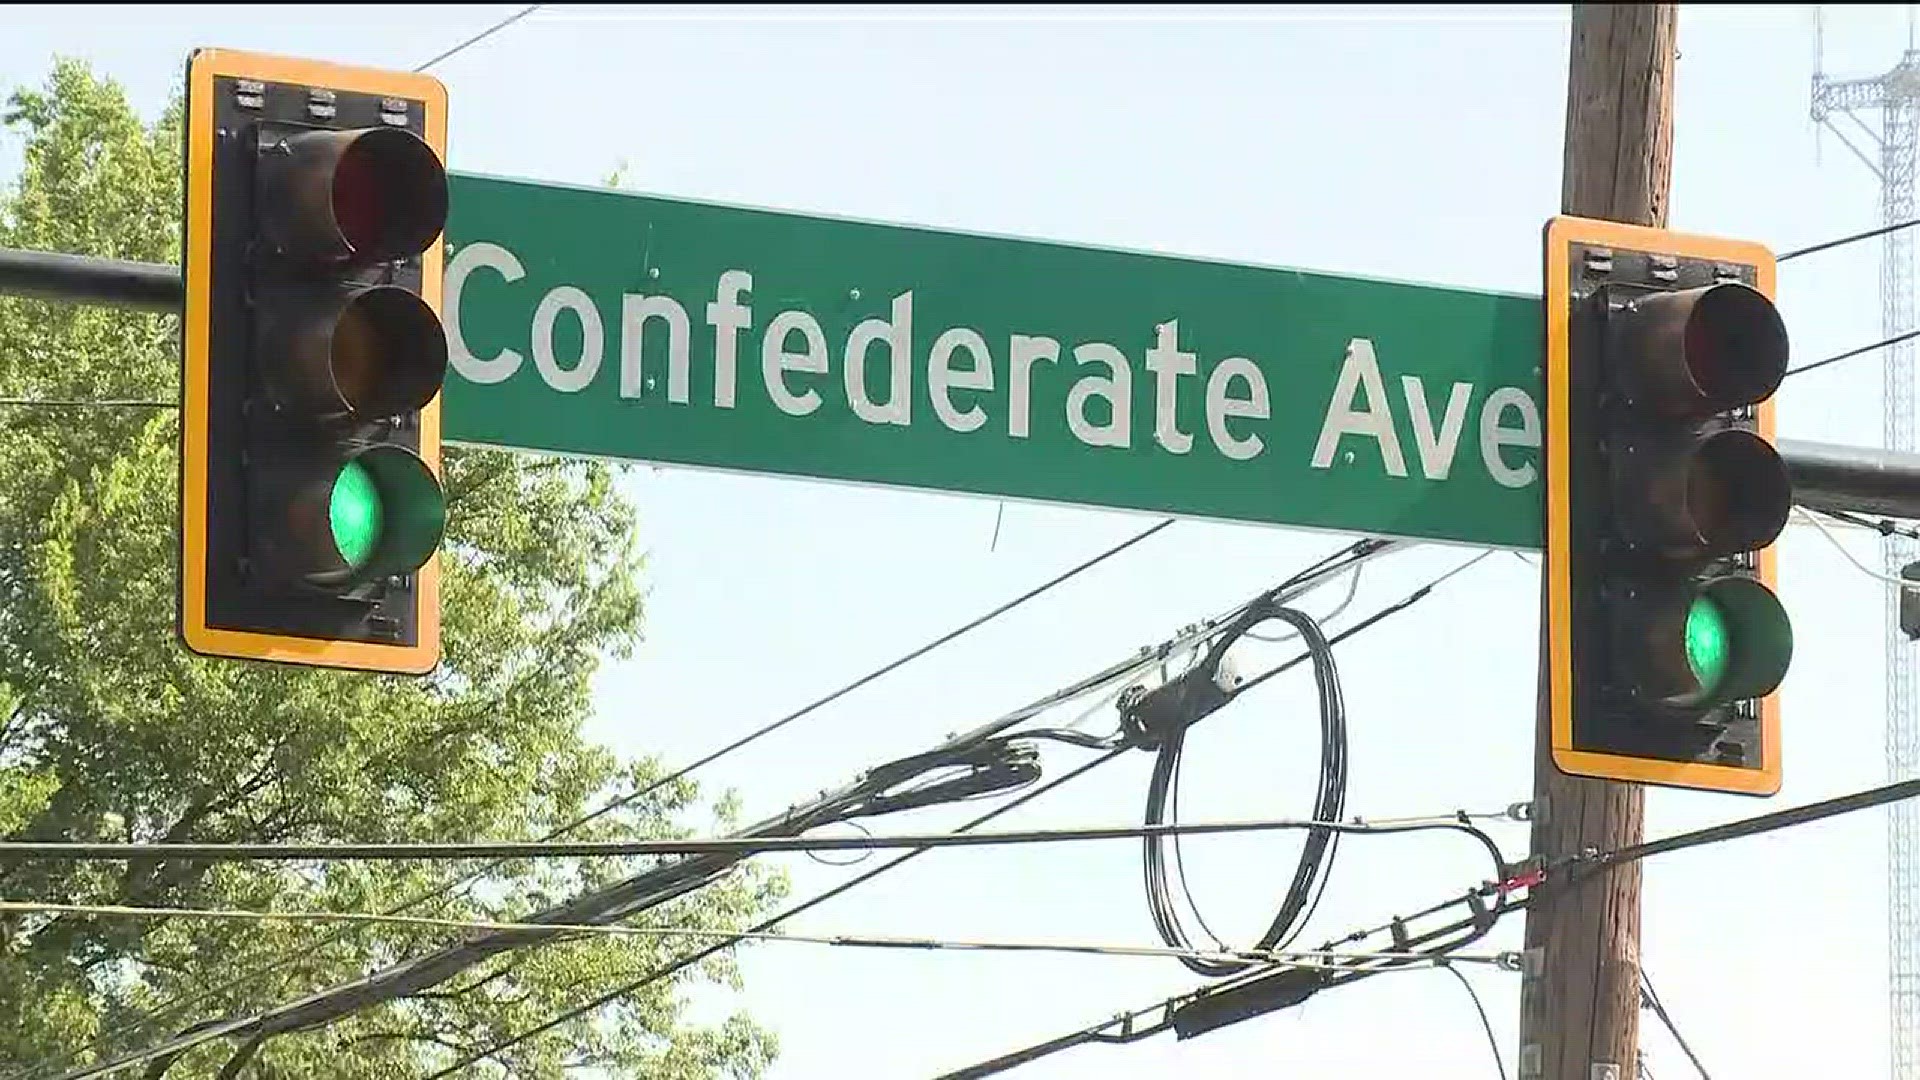 Atlanta officials say it's not a matter of "if" the city's monuments will be removed. It's a matter of when.